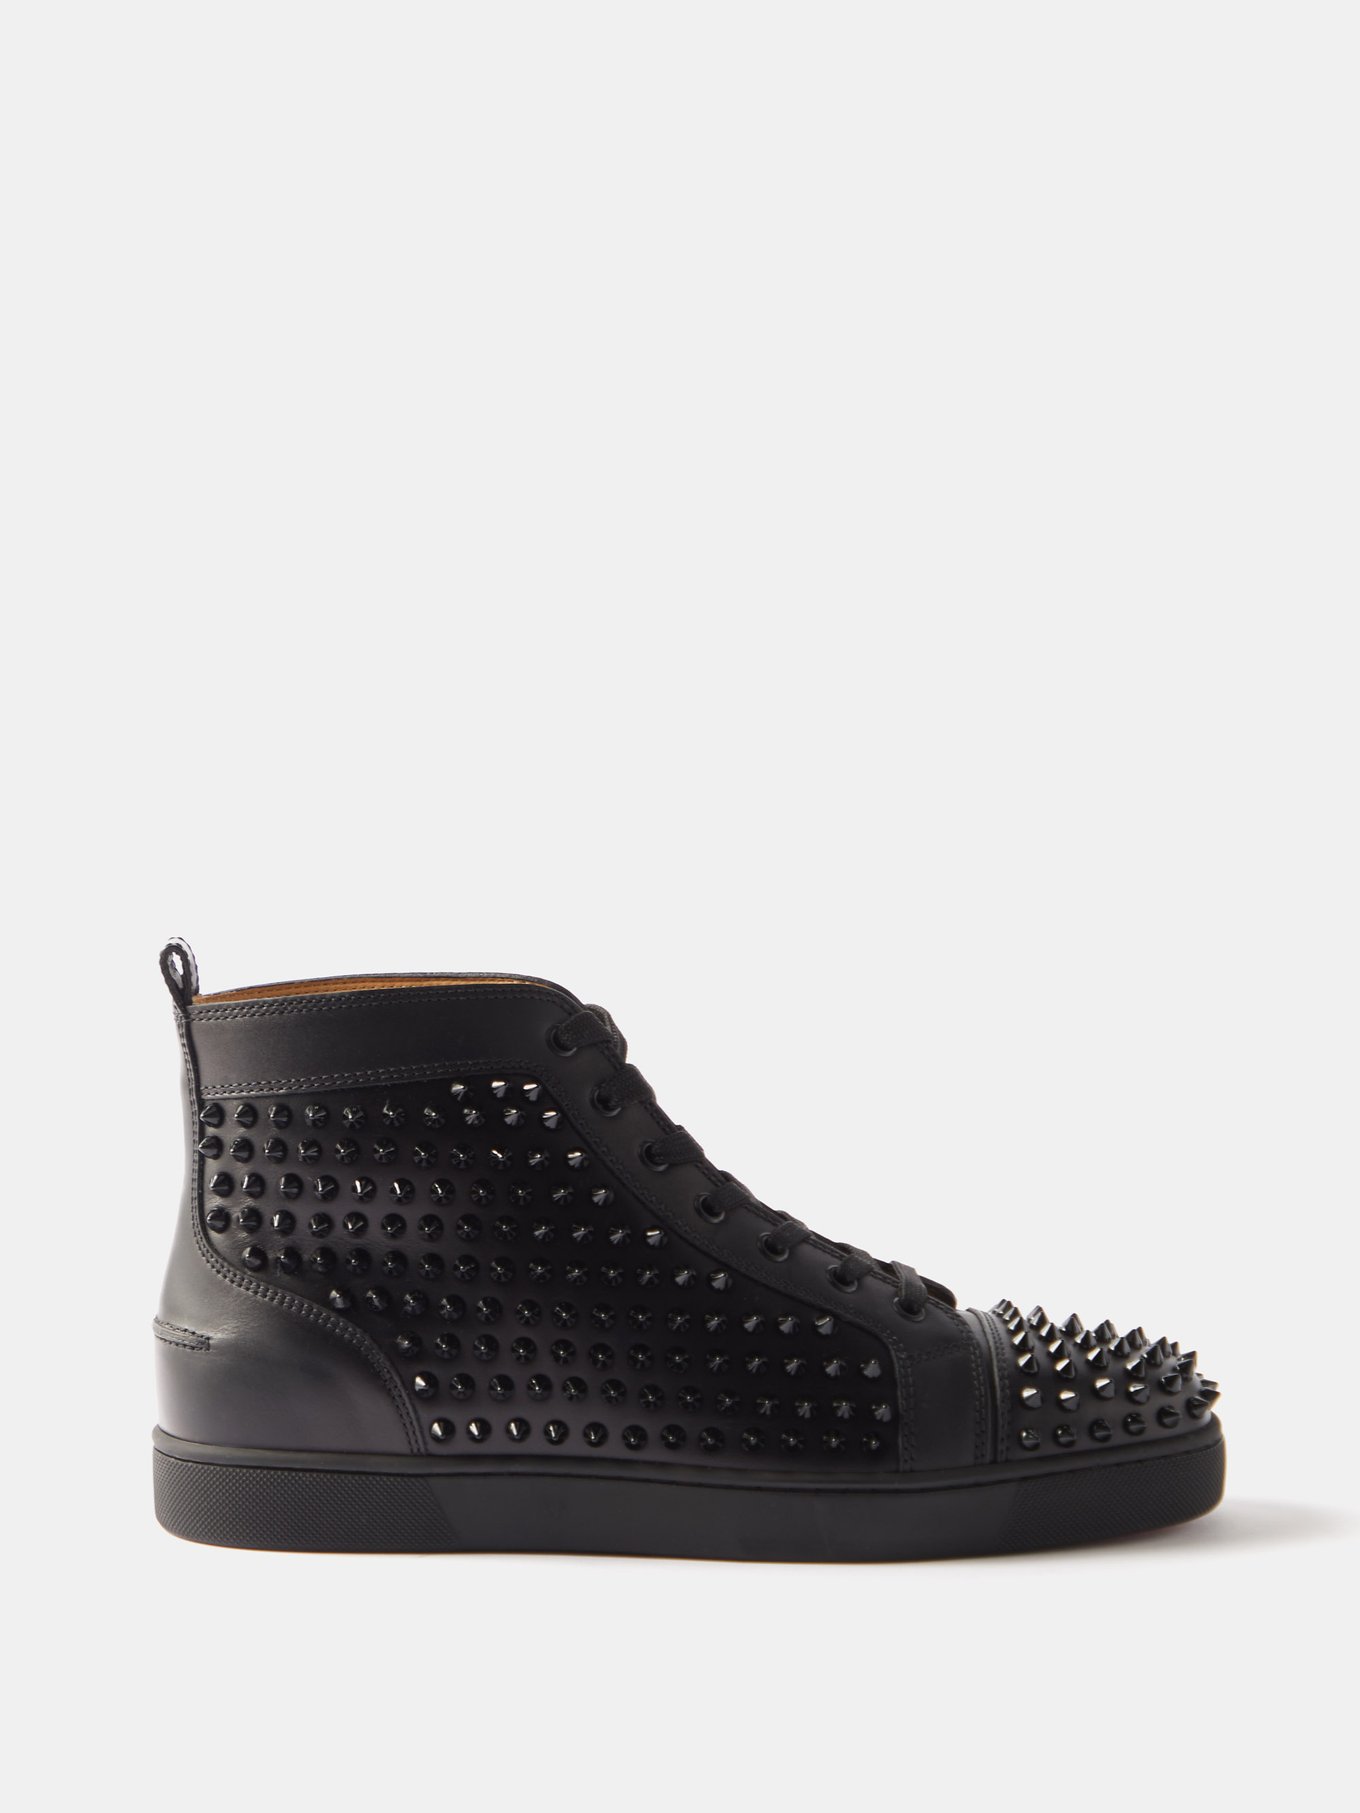 Christian Louboutin, Shoes, Louis Allover Spikes High Top Sneaker